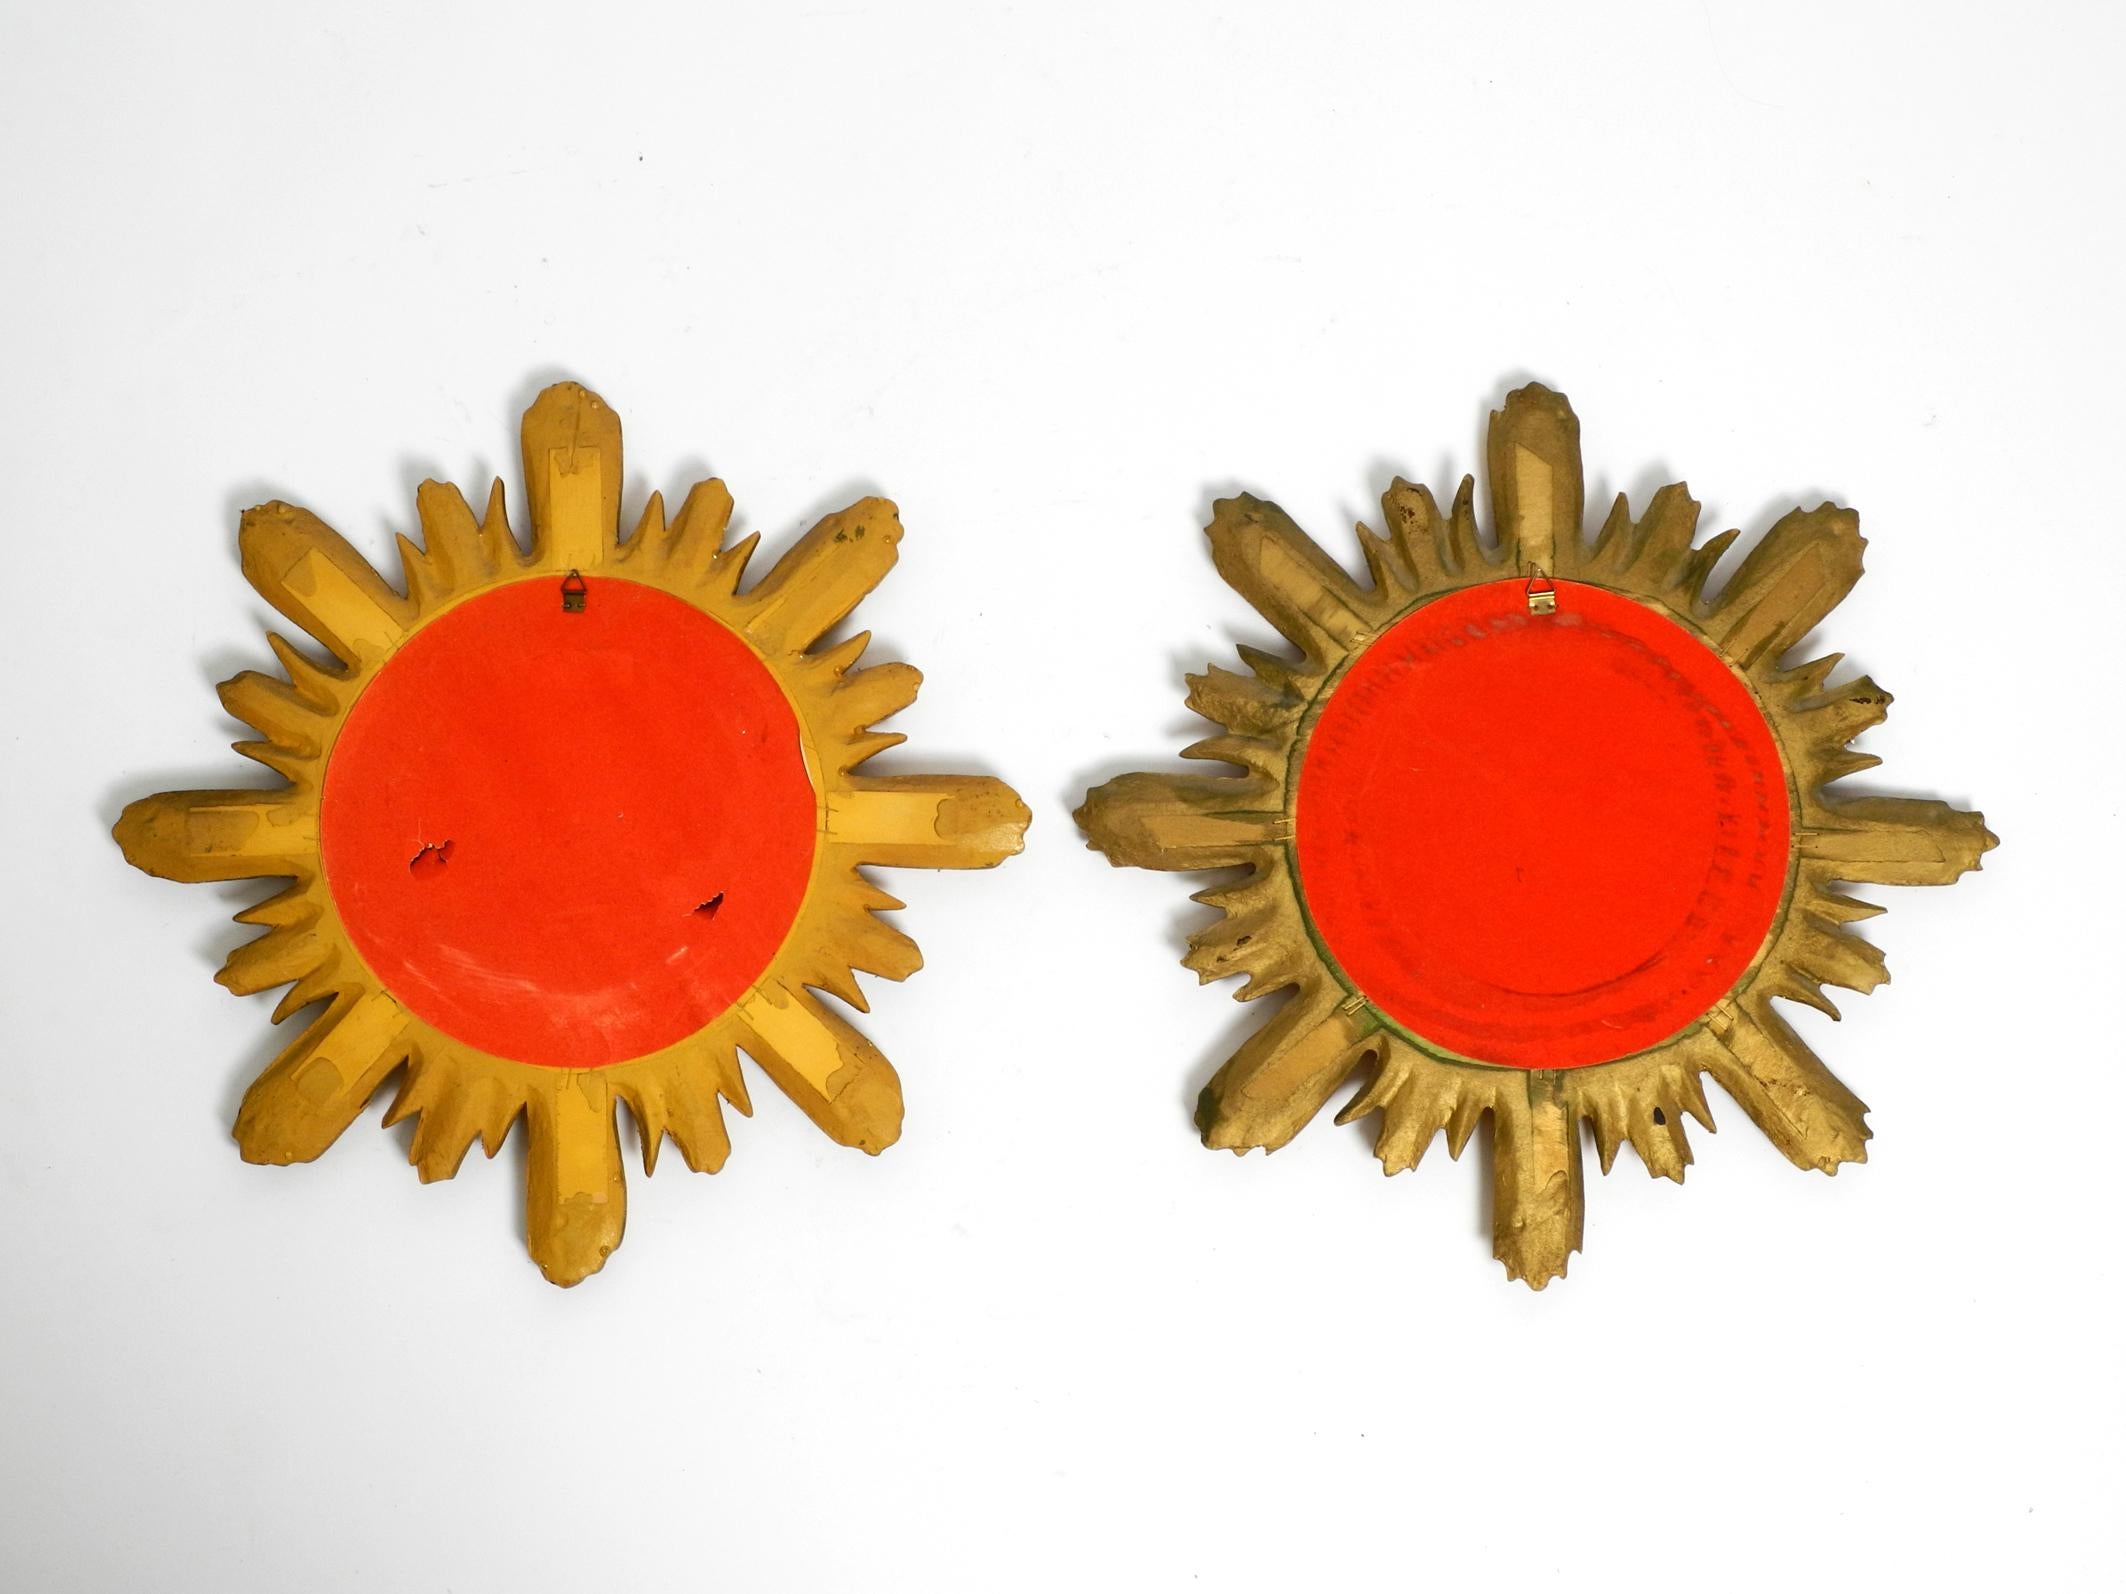 Pair of gold-plated mid-century sunburst wall mirrors made of wood and resin For Sale 3